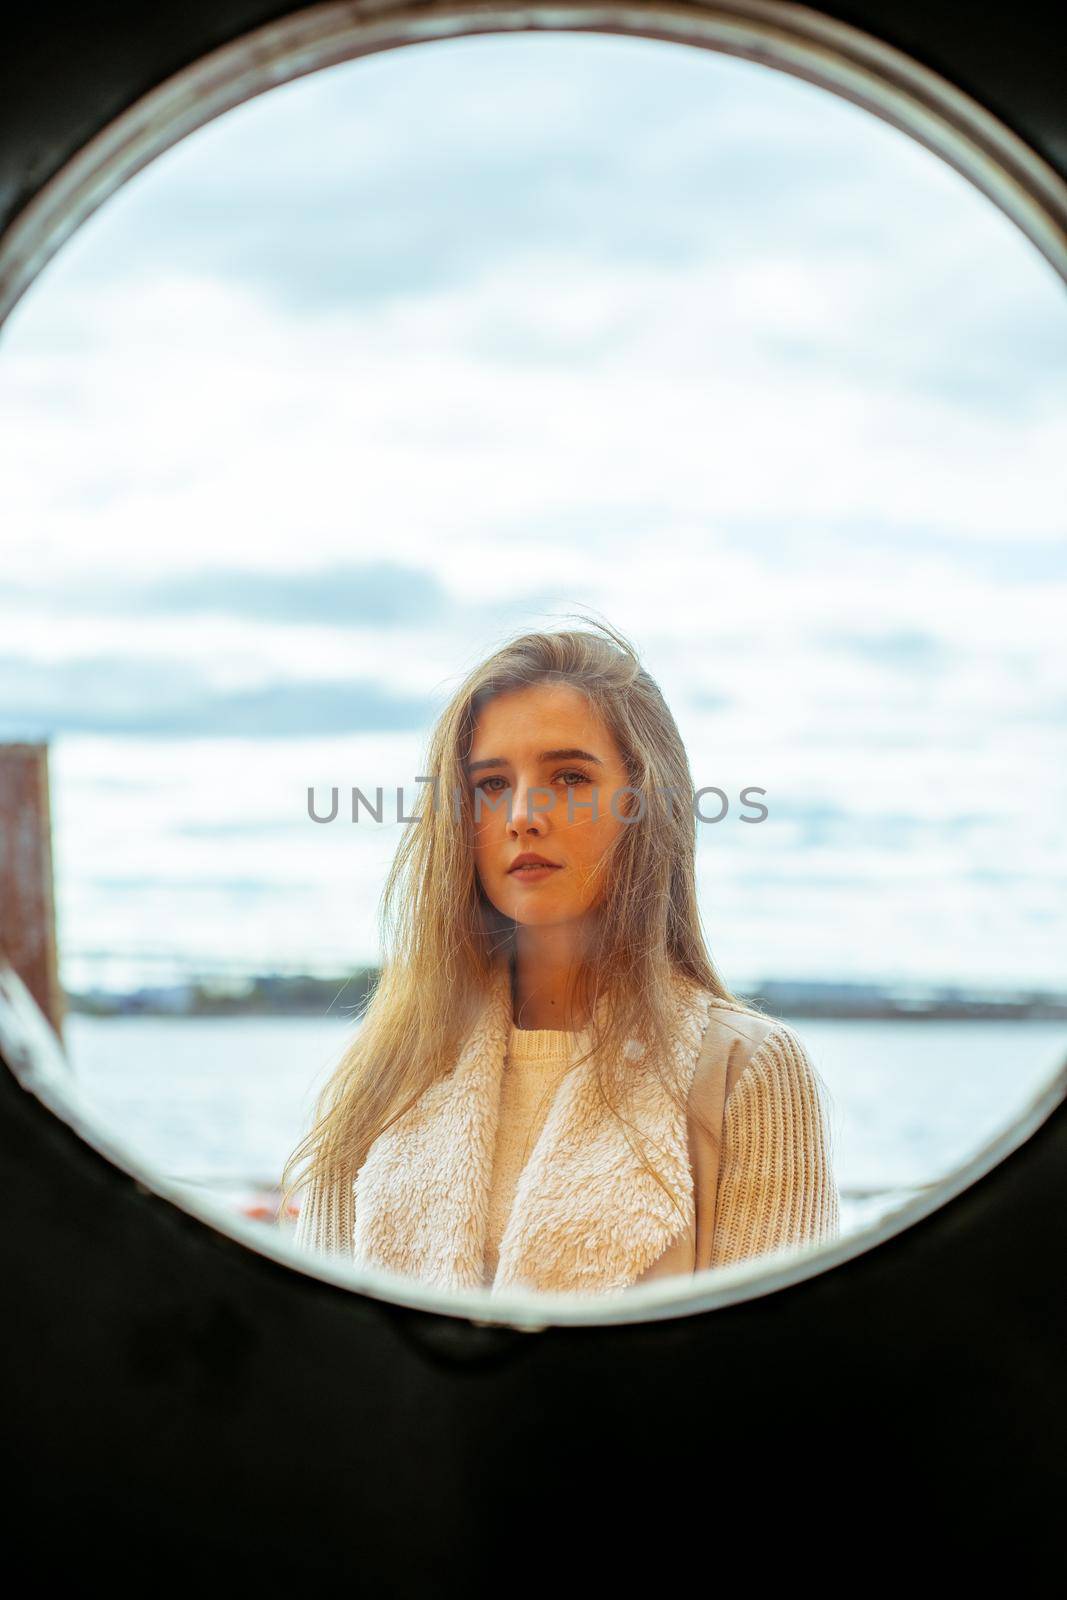 The face of young girl in round frame window on background of sea, ocean, on waterfront. Portrait in a circle, backlit, vertical